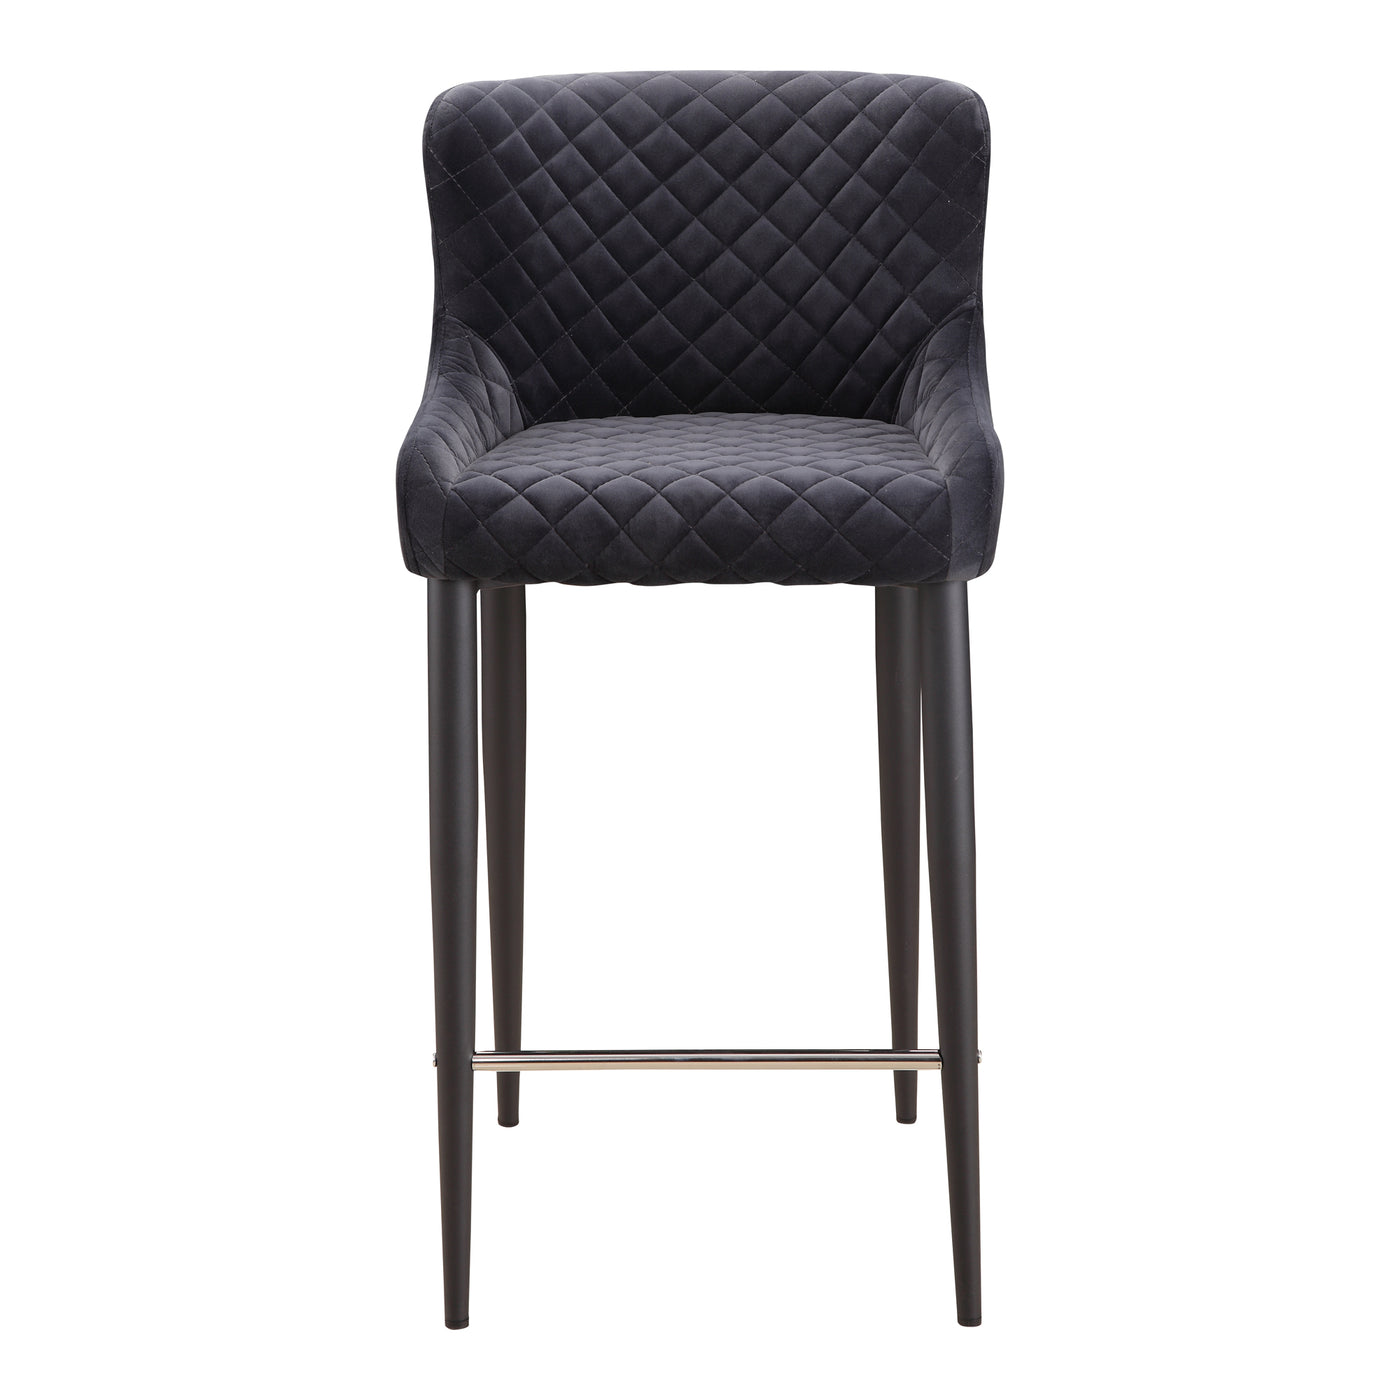 Etta features a wide, comfortably padded seat with stunning diamond-tufted velvet upholstery.
<h6>Dimensions</h6>
H= 37
W=...